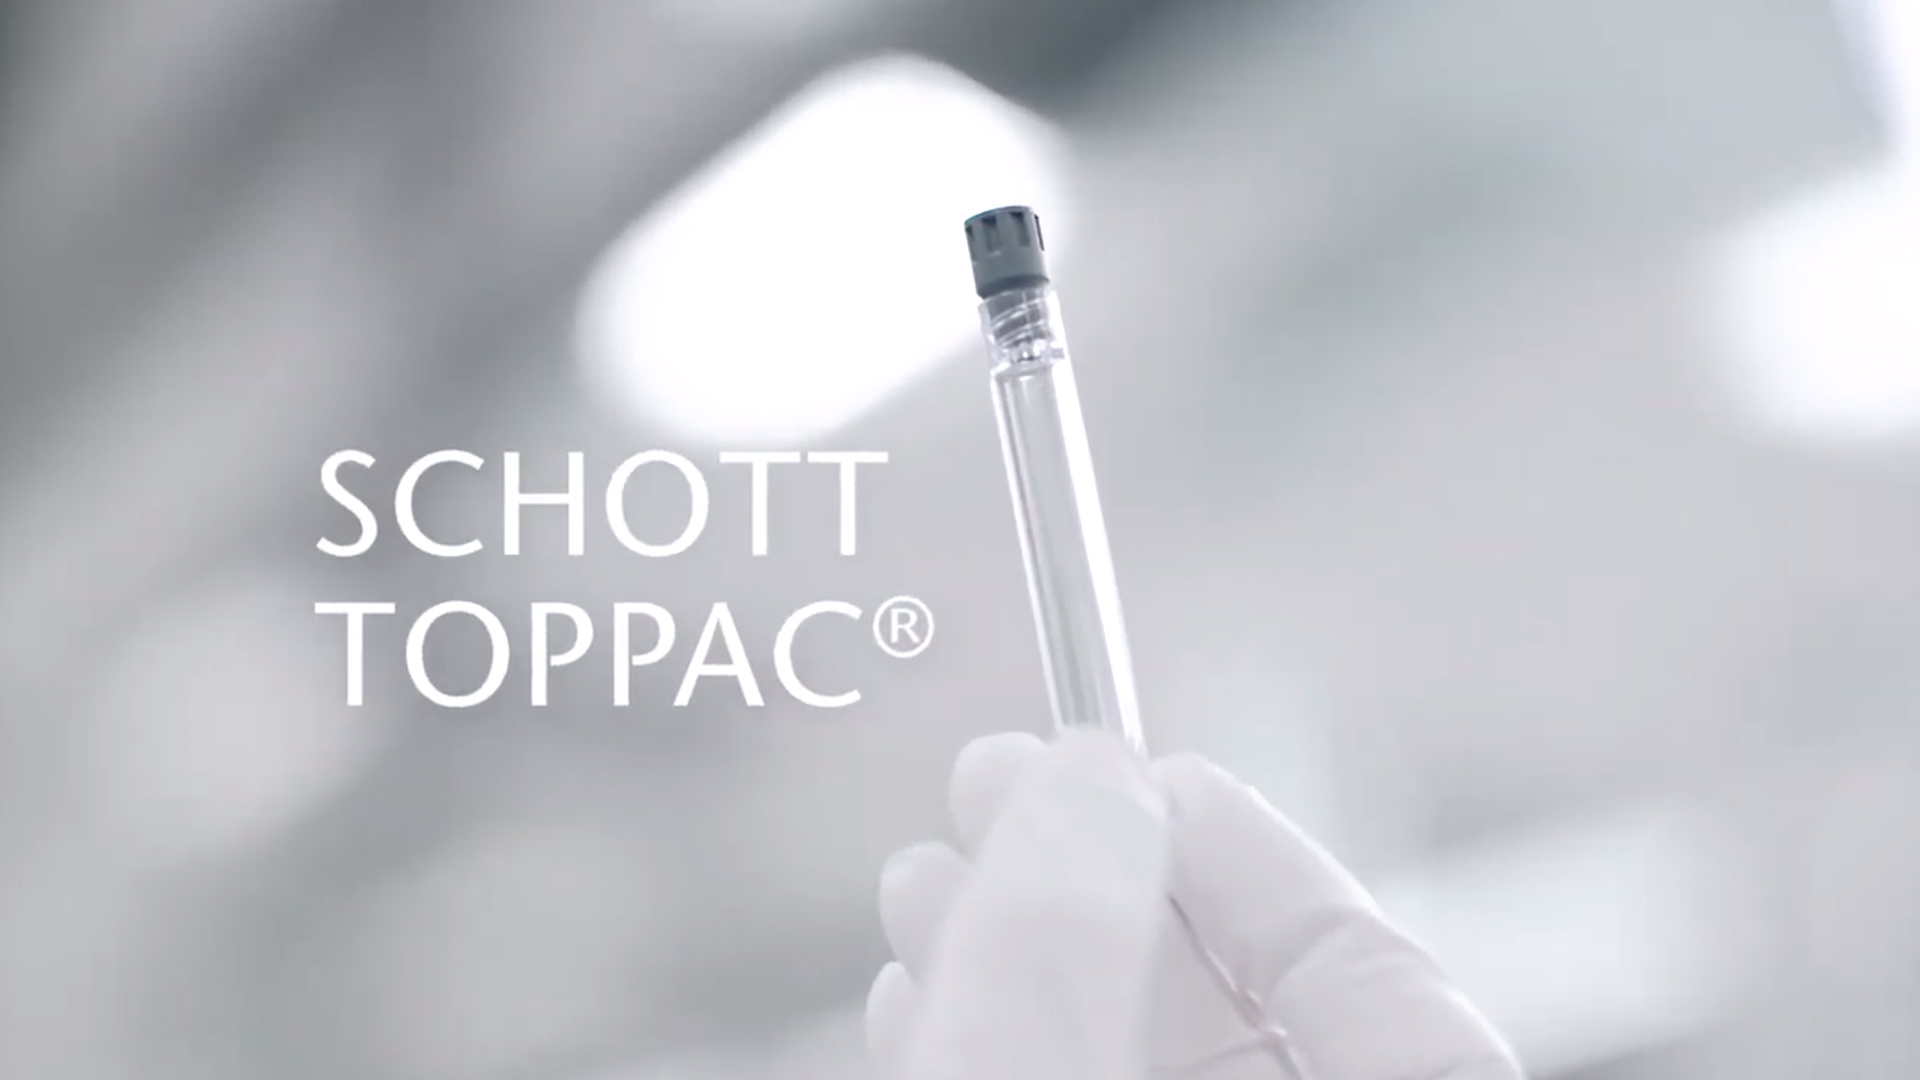 Cleanroom production of SCHOTT TOPPAC syringes.